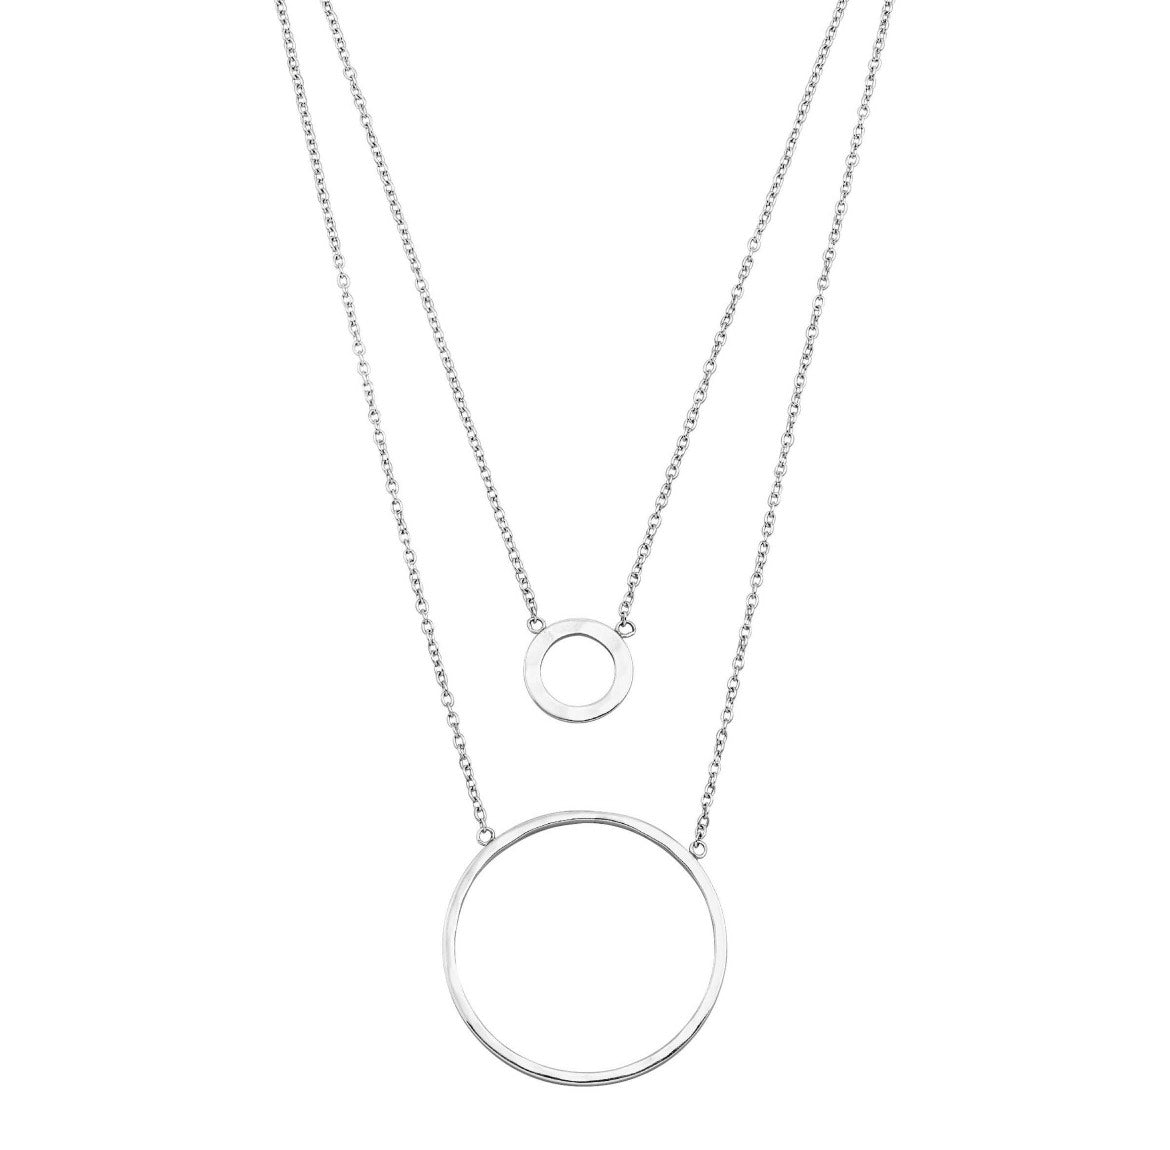 Silpada 'Layered Karma' Necklace in Sterling Silver